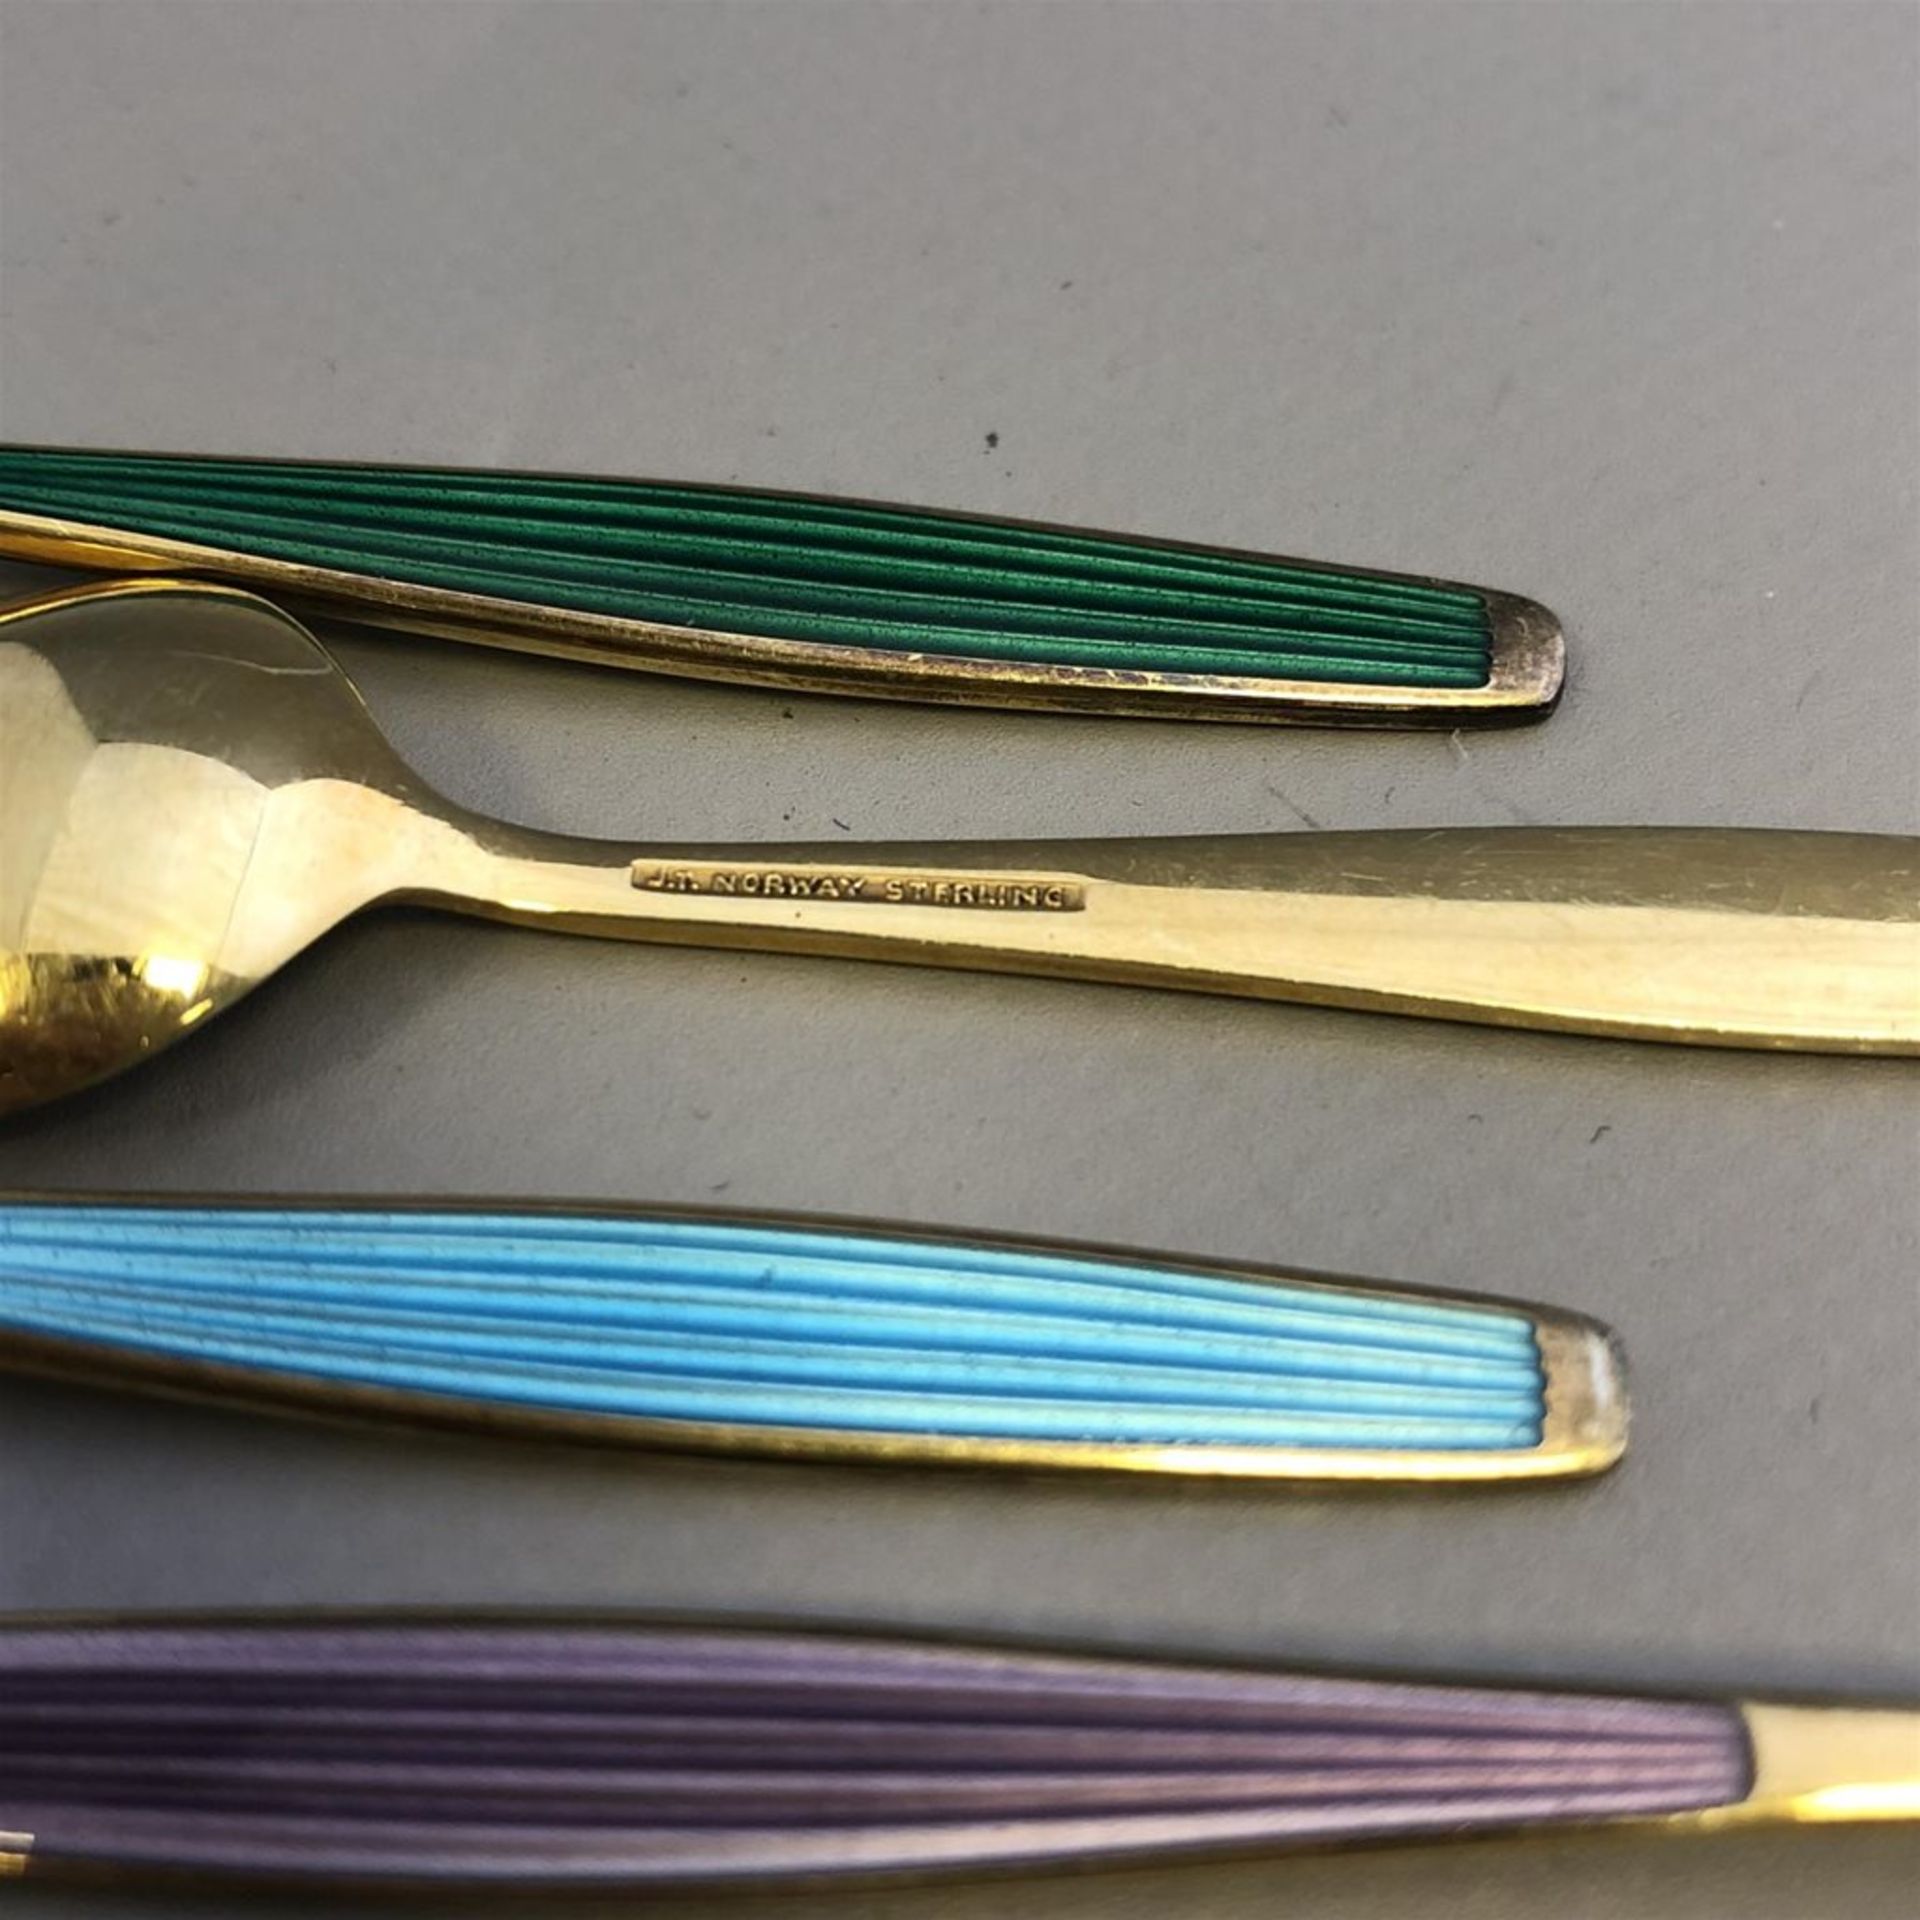 Set of 4 sterling silver gilt and enamel demitasse spoons - Norway - Image 2 of 2